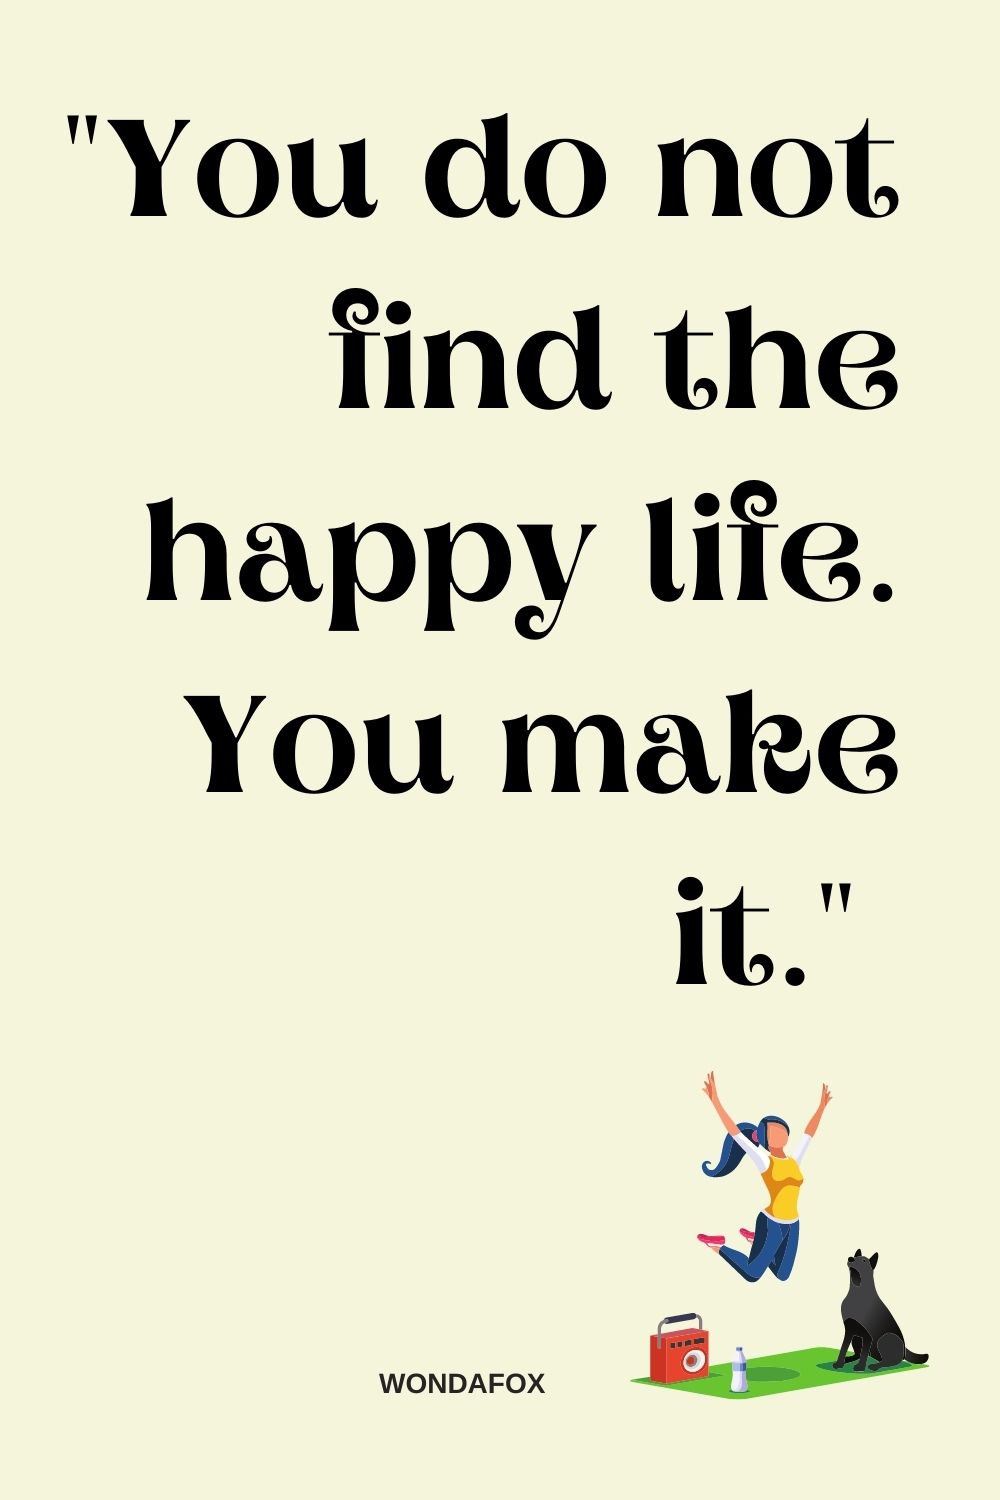 "You do not find the happy life. You make it." 
Thomas S. Monson